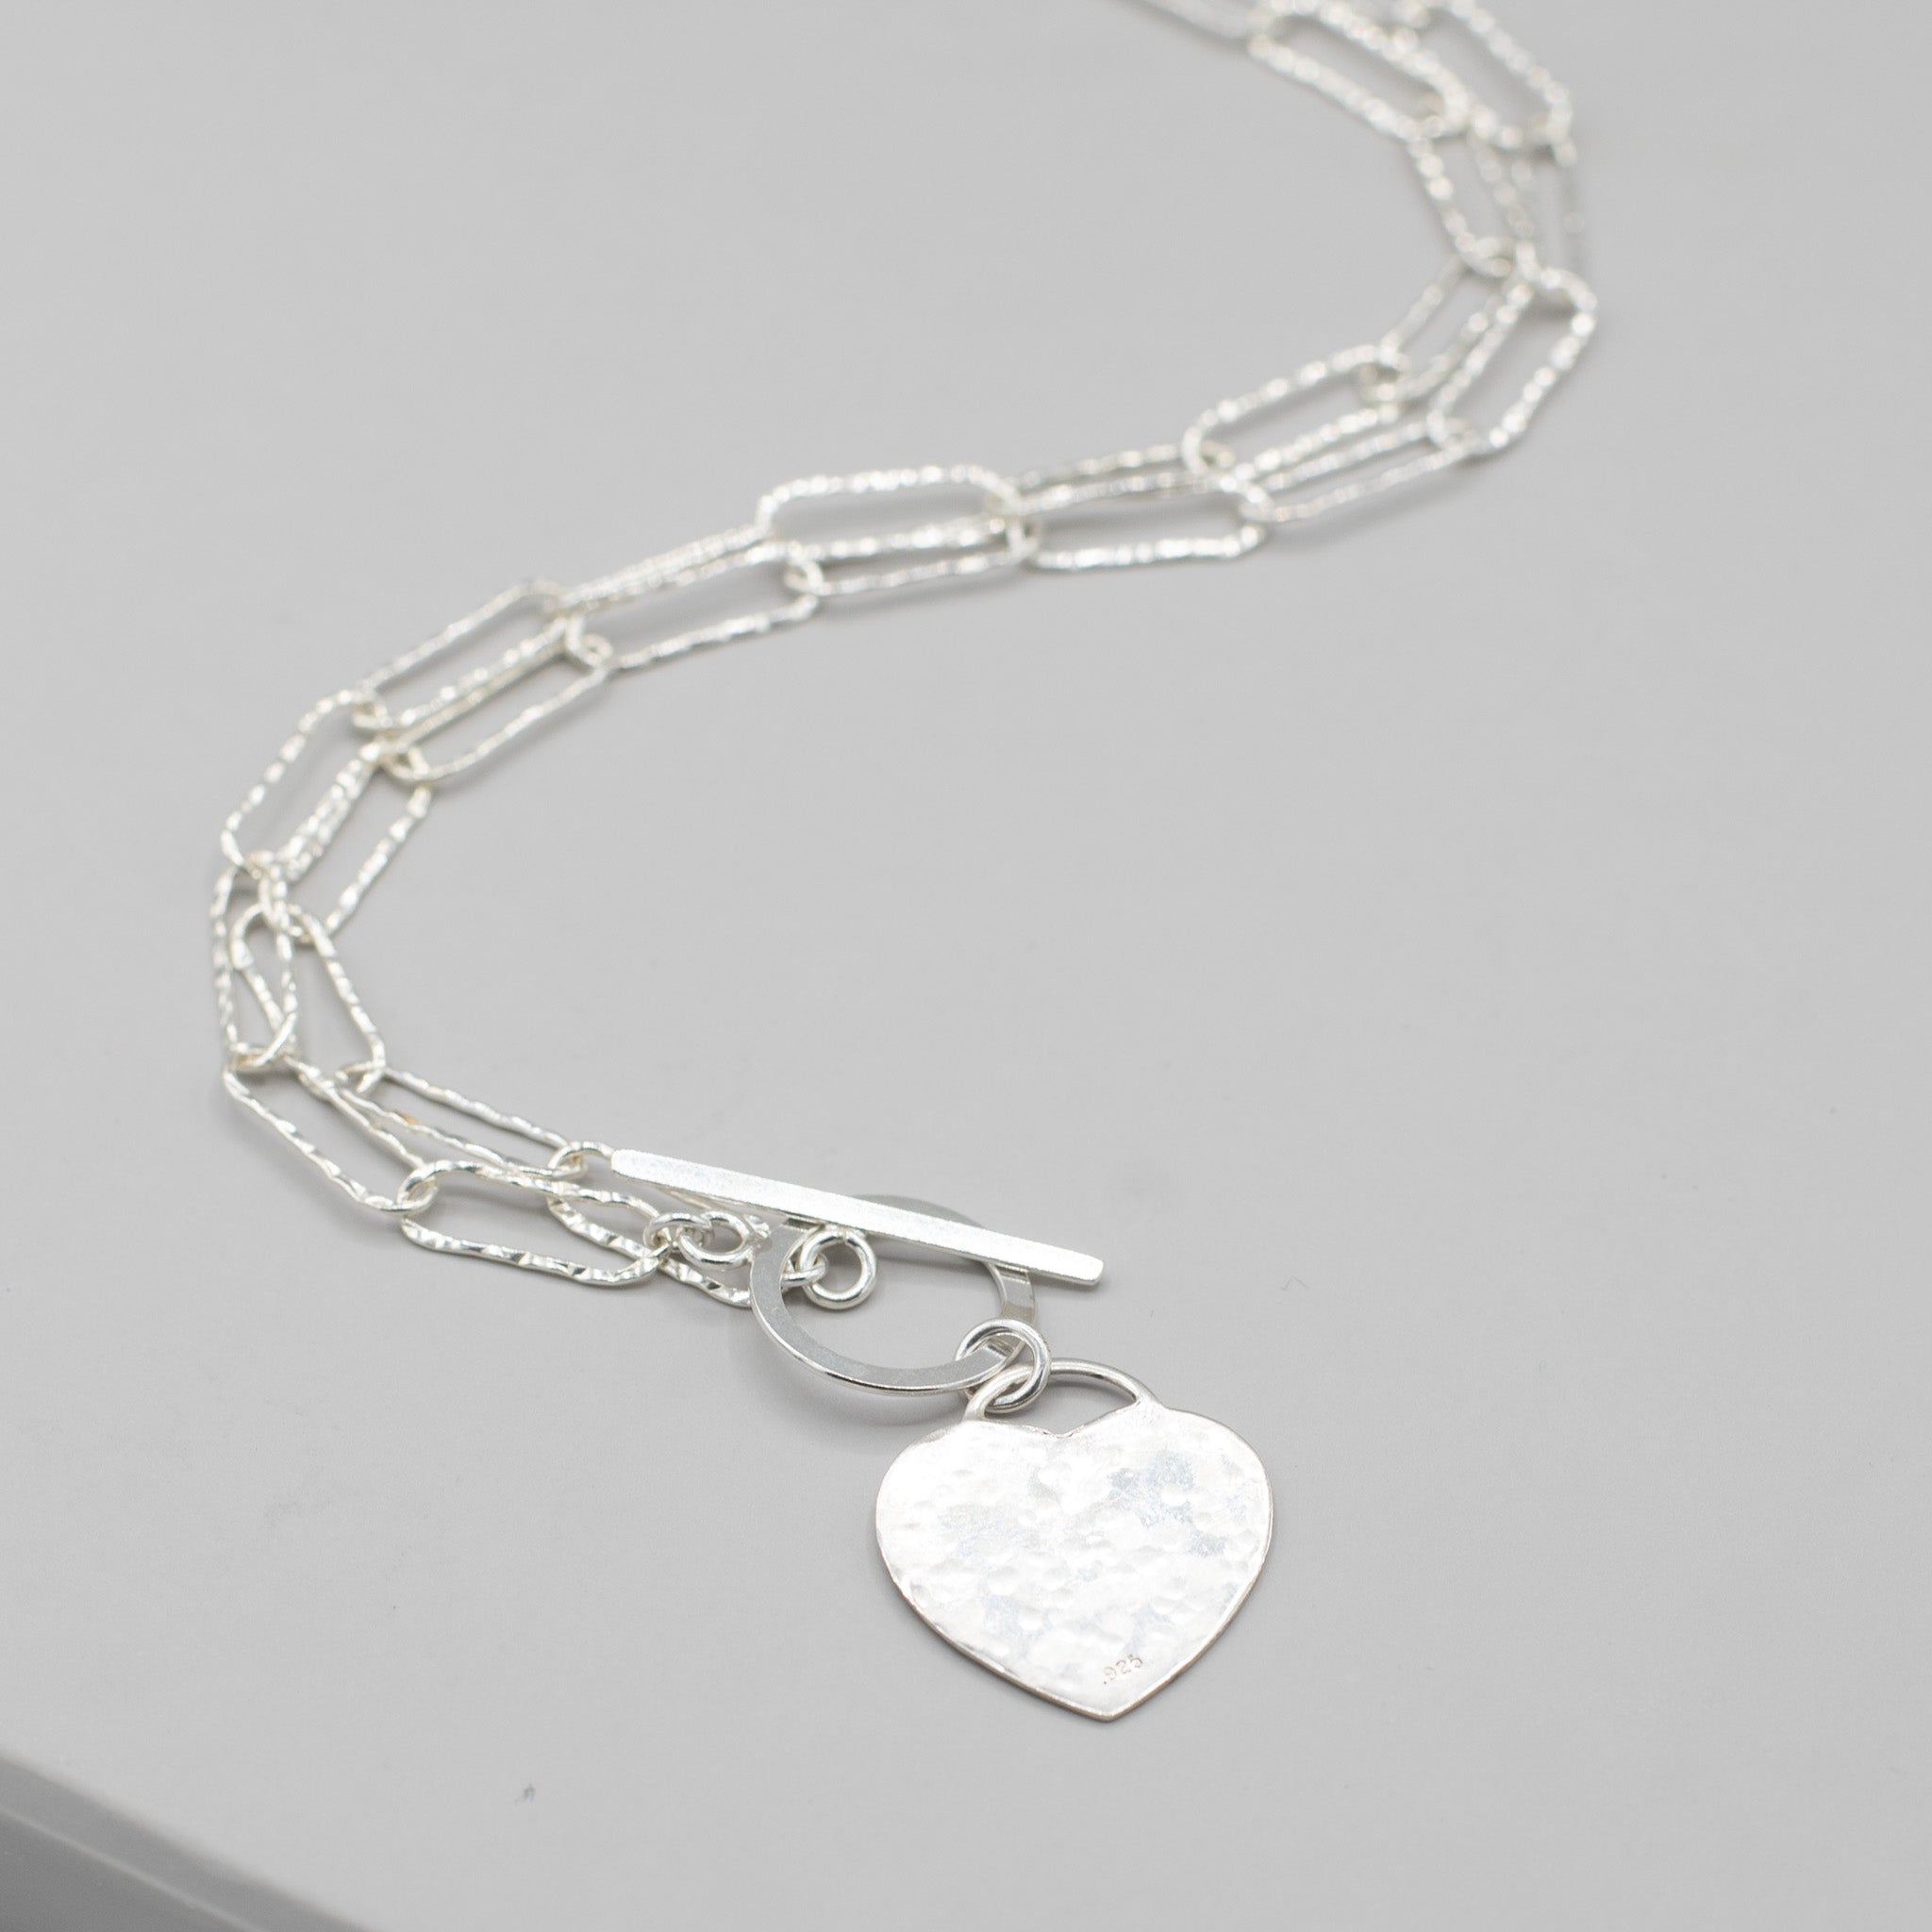 XL Sterling Silver Toggle Heart Necklace